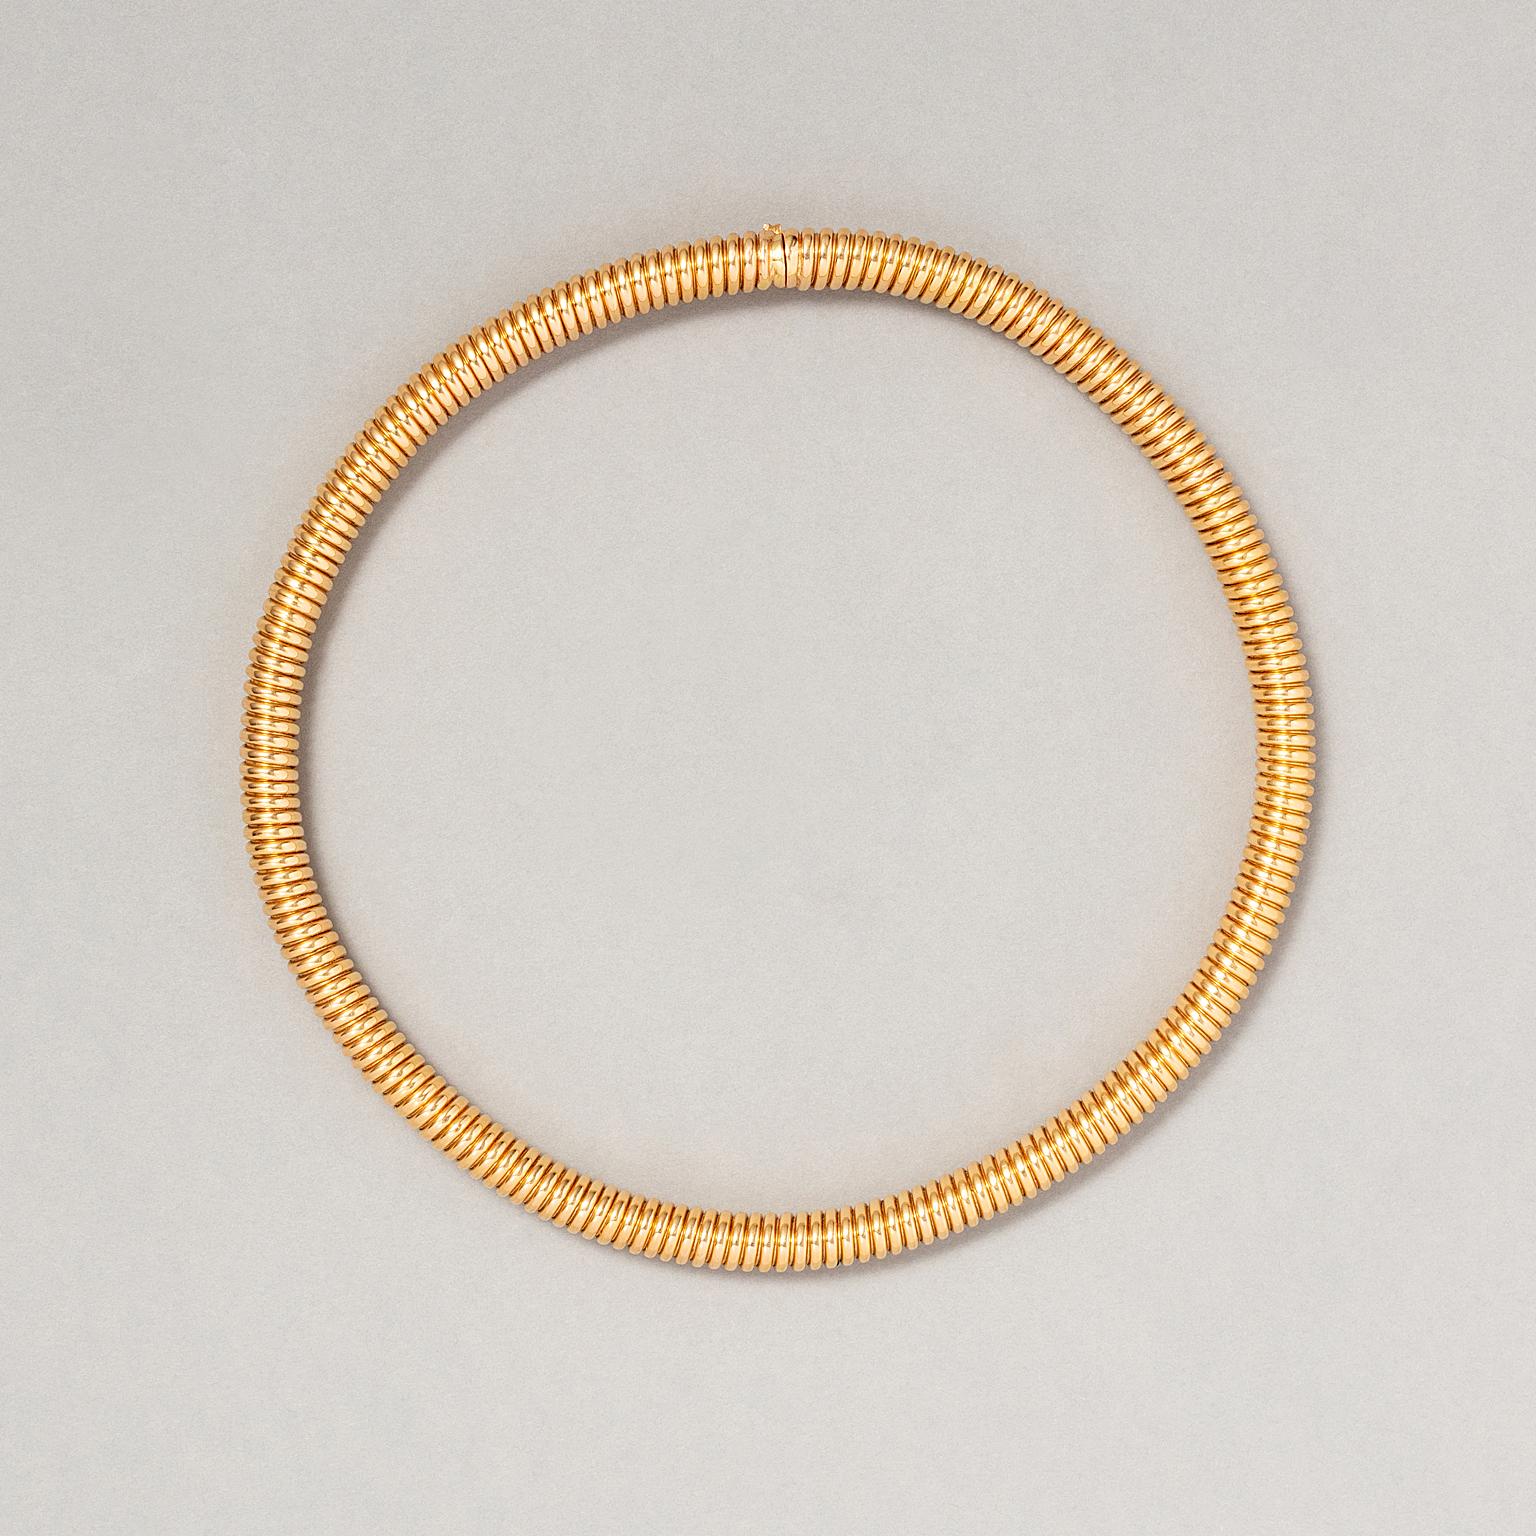 An 18 carat yellow gold tubogas necklace with a box lock and a safety eight clasp, master mark: Weingrill, circa 1960.

The tubogas, or gas pipe, was popularised in the 1930s due to the scarcity of resources during World War II. Gas-pipe jewellery